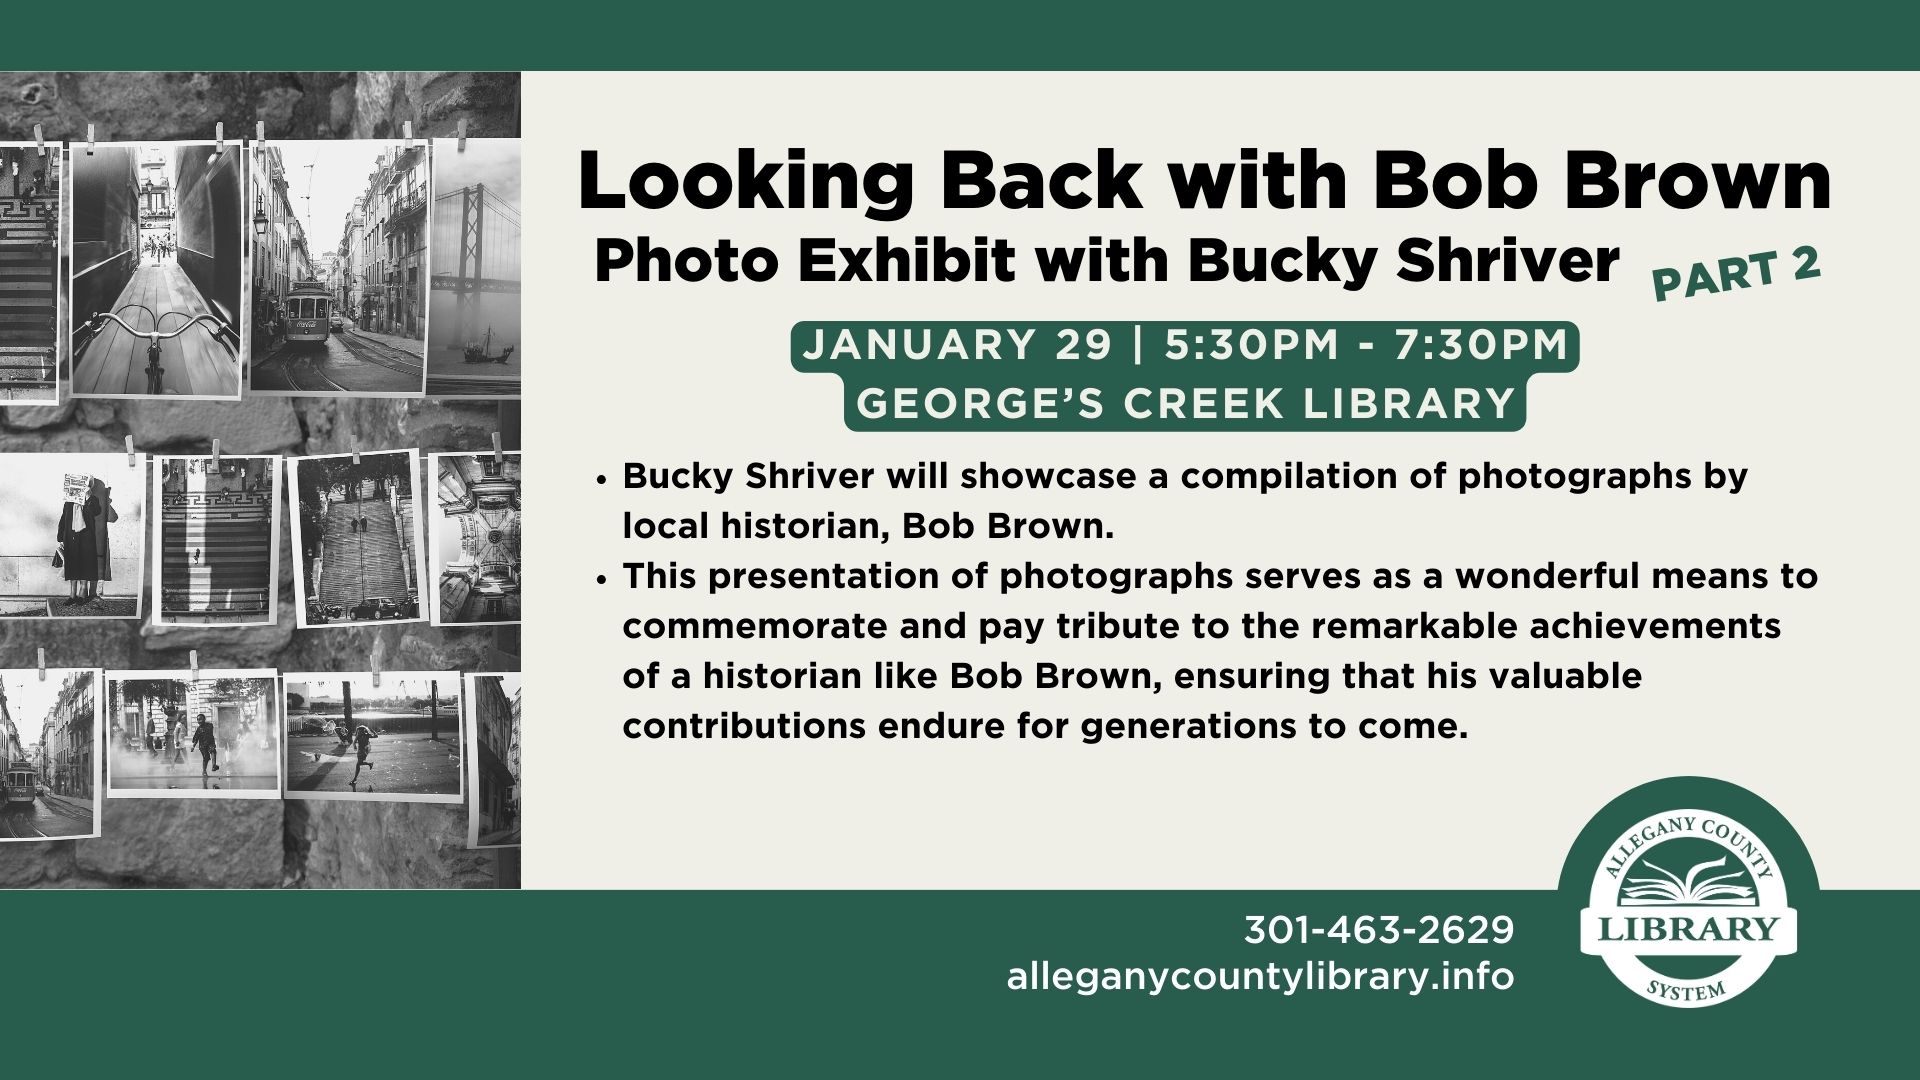 a picture of Looking Back with Bob Brown event at the George's Creek Library.